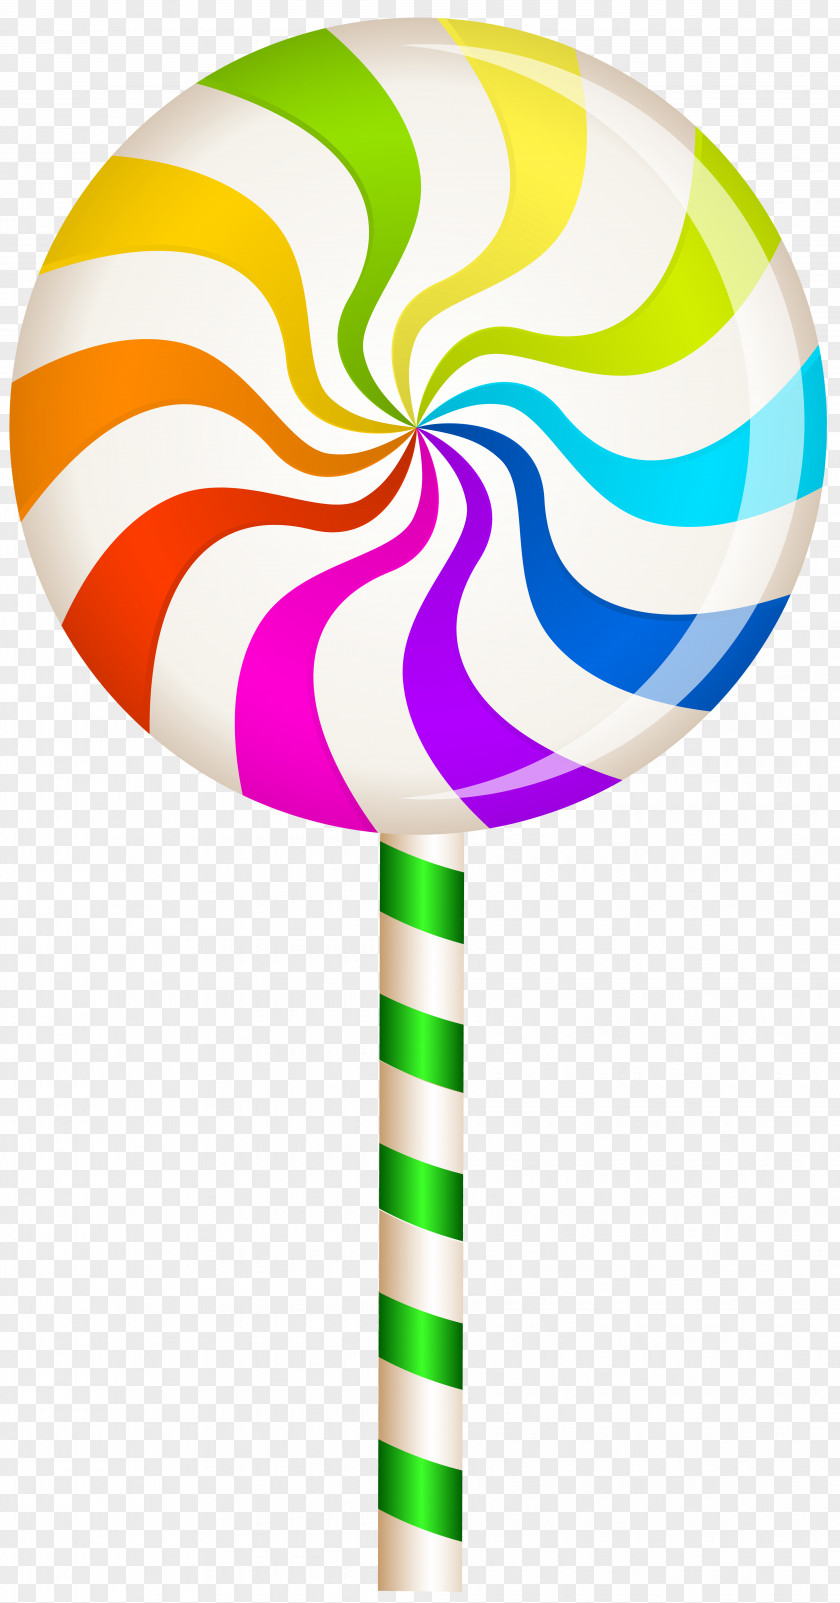 Multicolor Swirl Lollipop Clip Art Image Candy Confectionery PNG